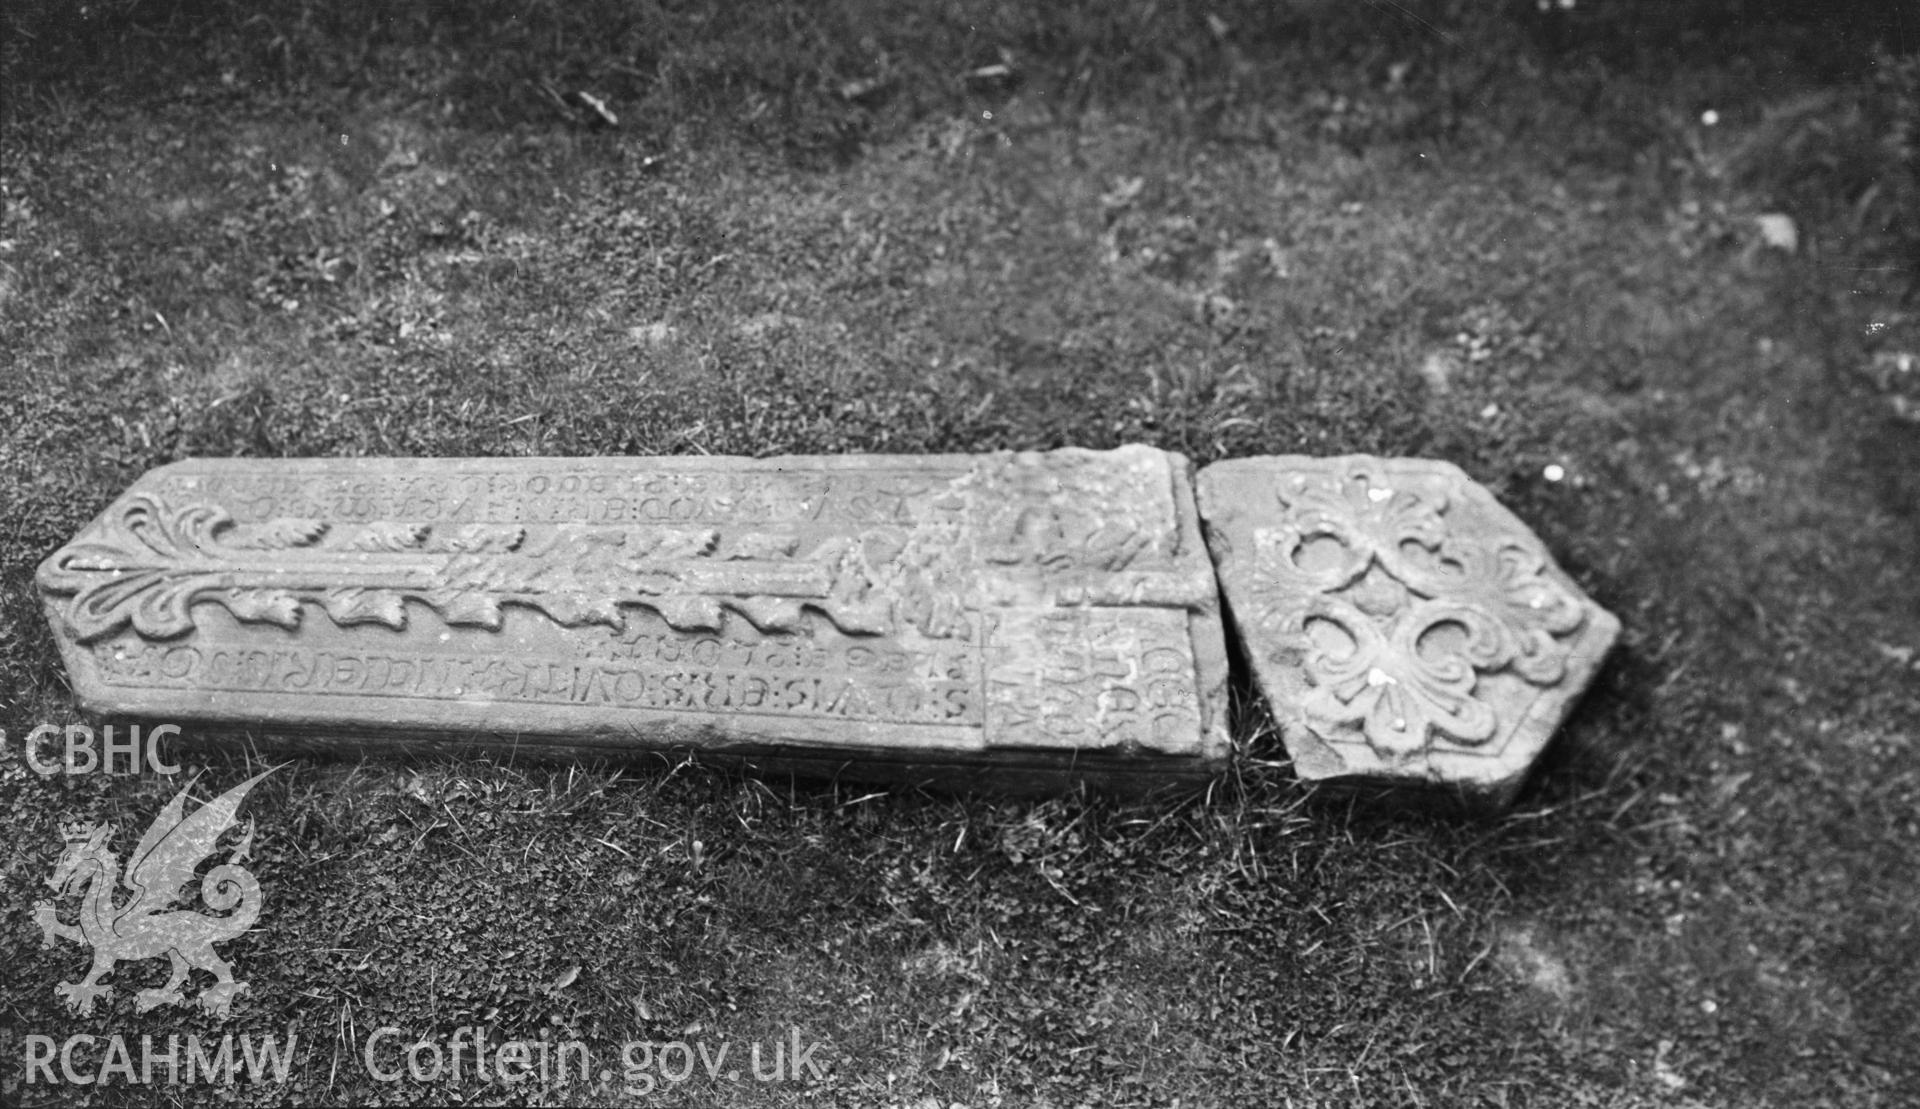 Digital copy of nitrate negative showing view of inscribed stone at Chirk Castle taken by Leonard Monroe, undated.